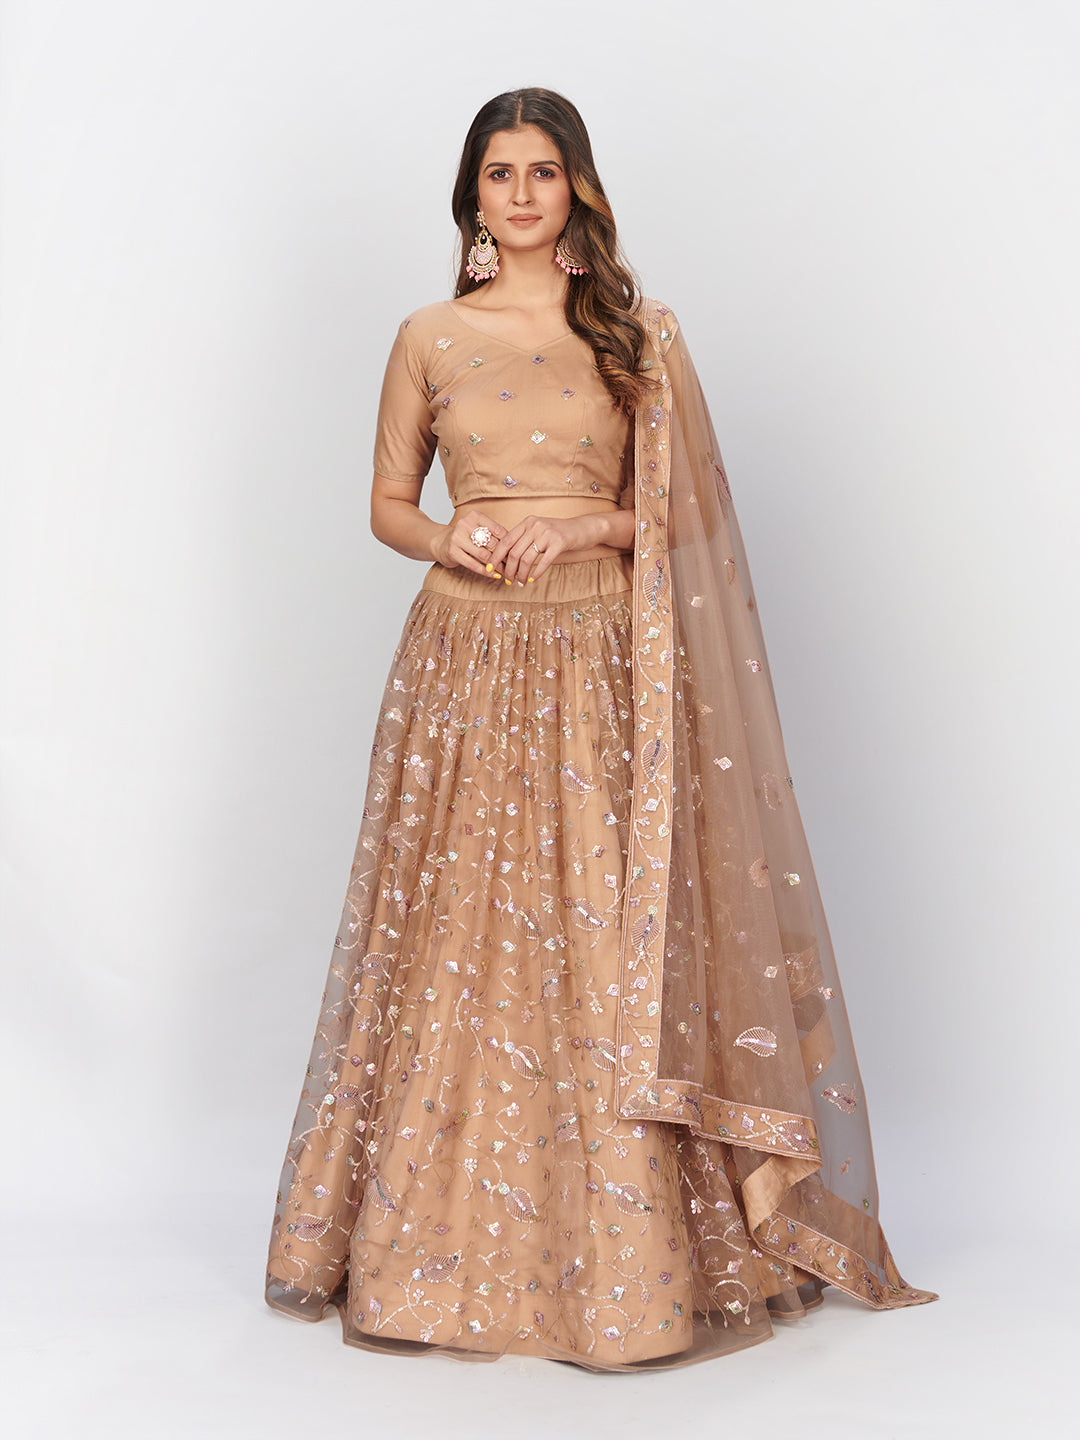 Beige color Lehenga choli with sequence work